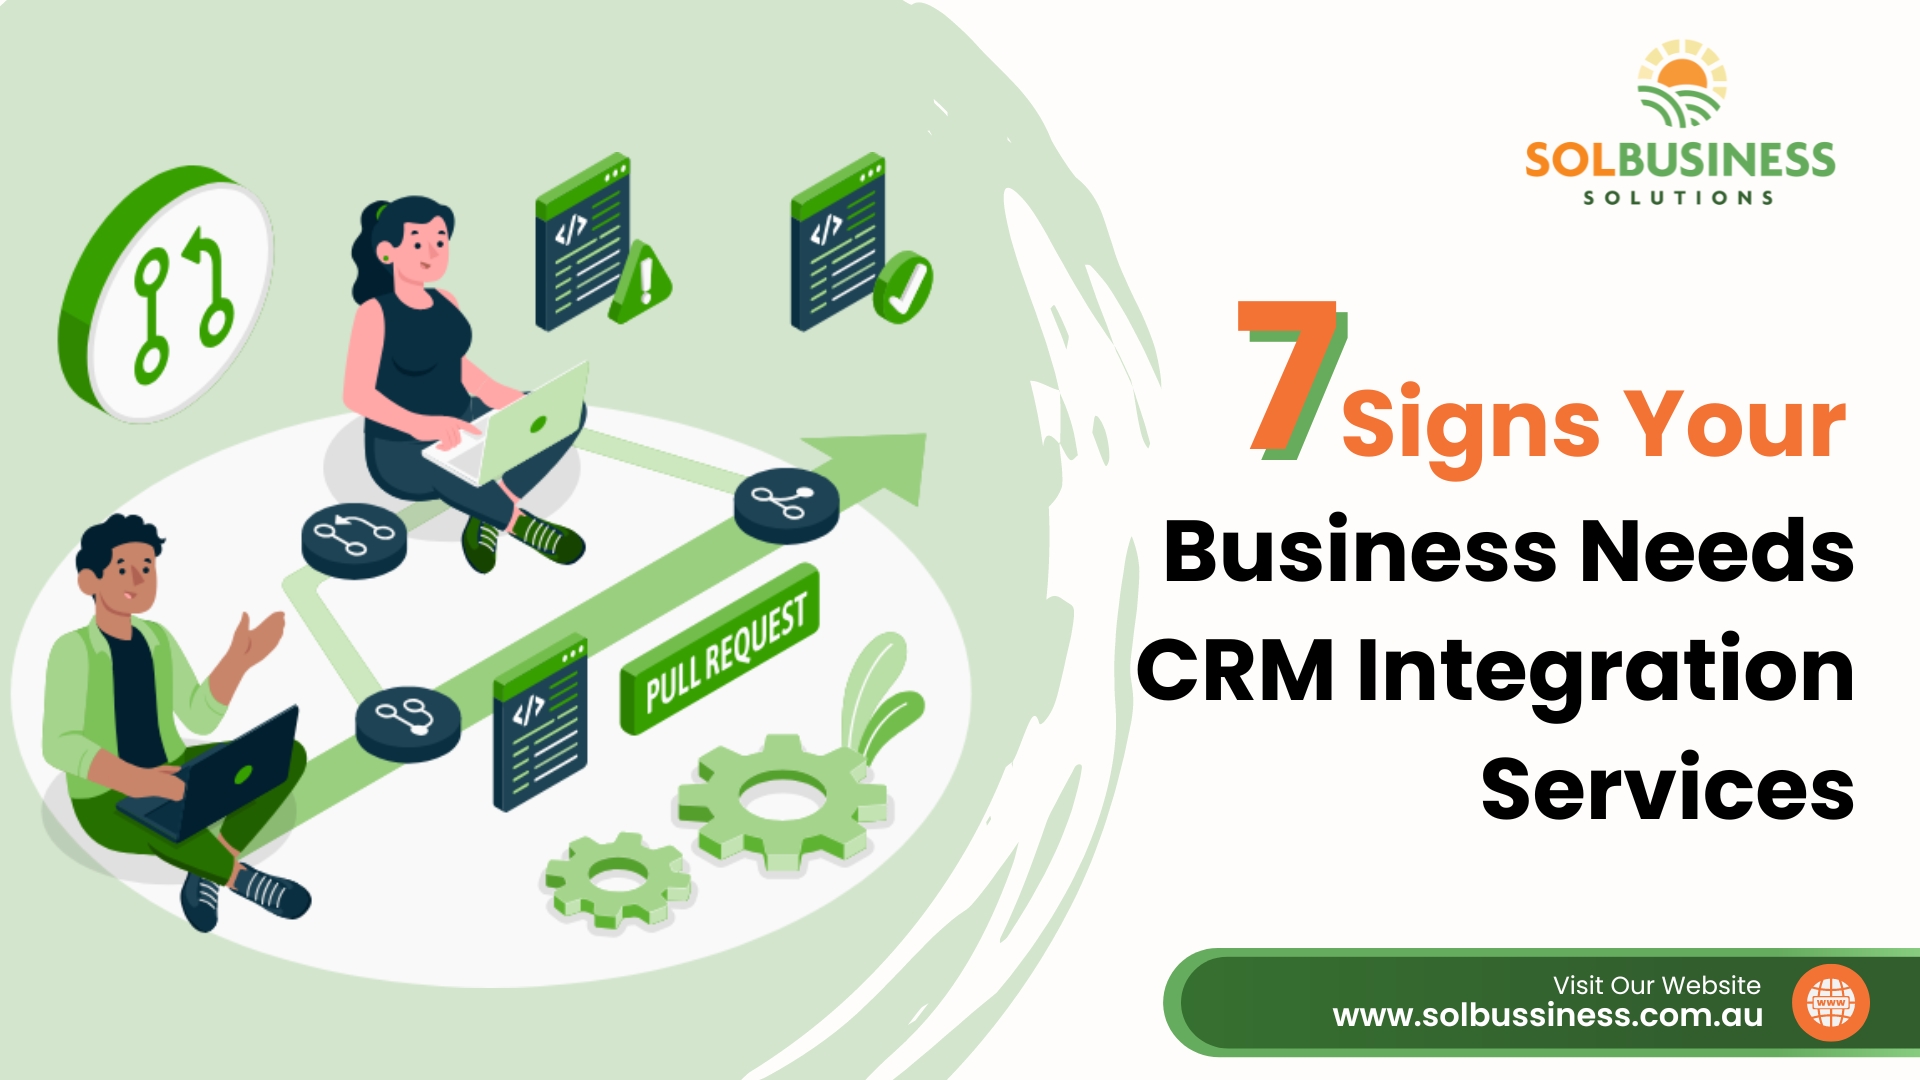 7 Signs Your Business Needs CRM Integration Services